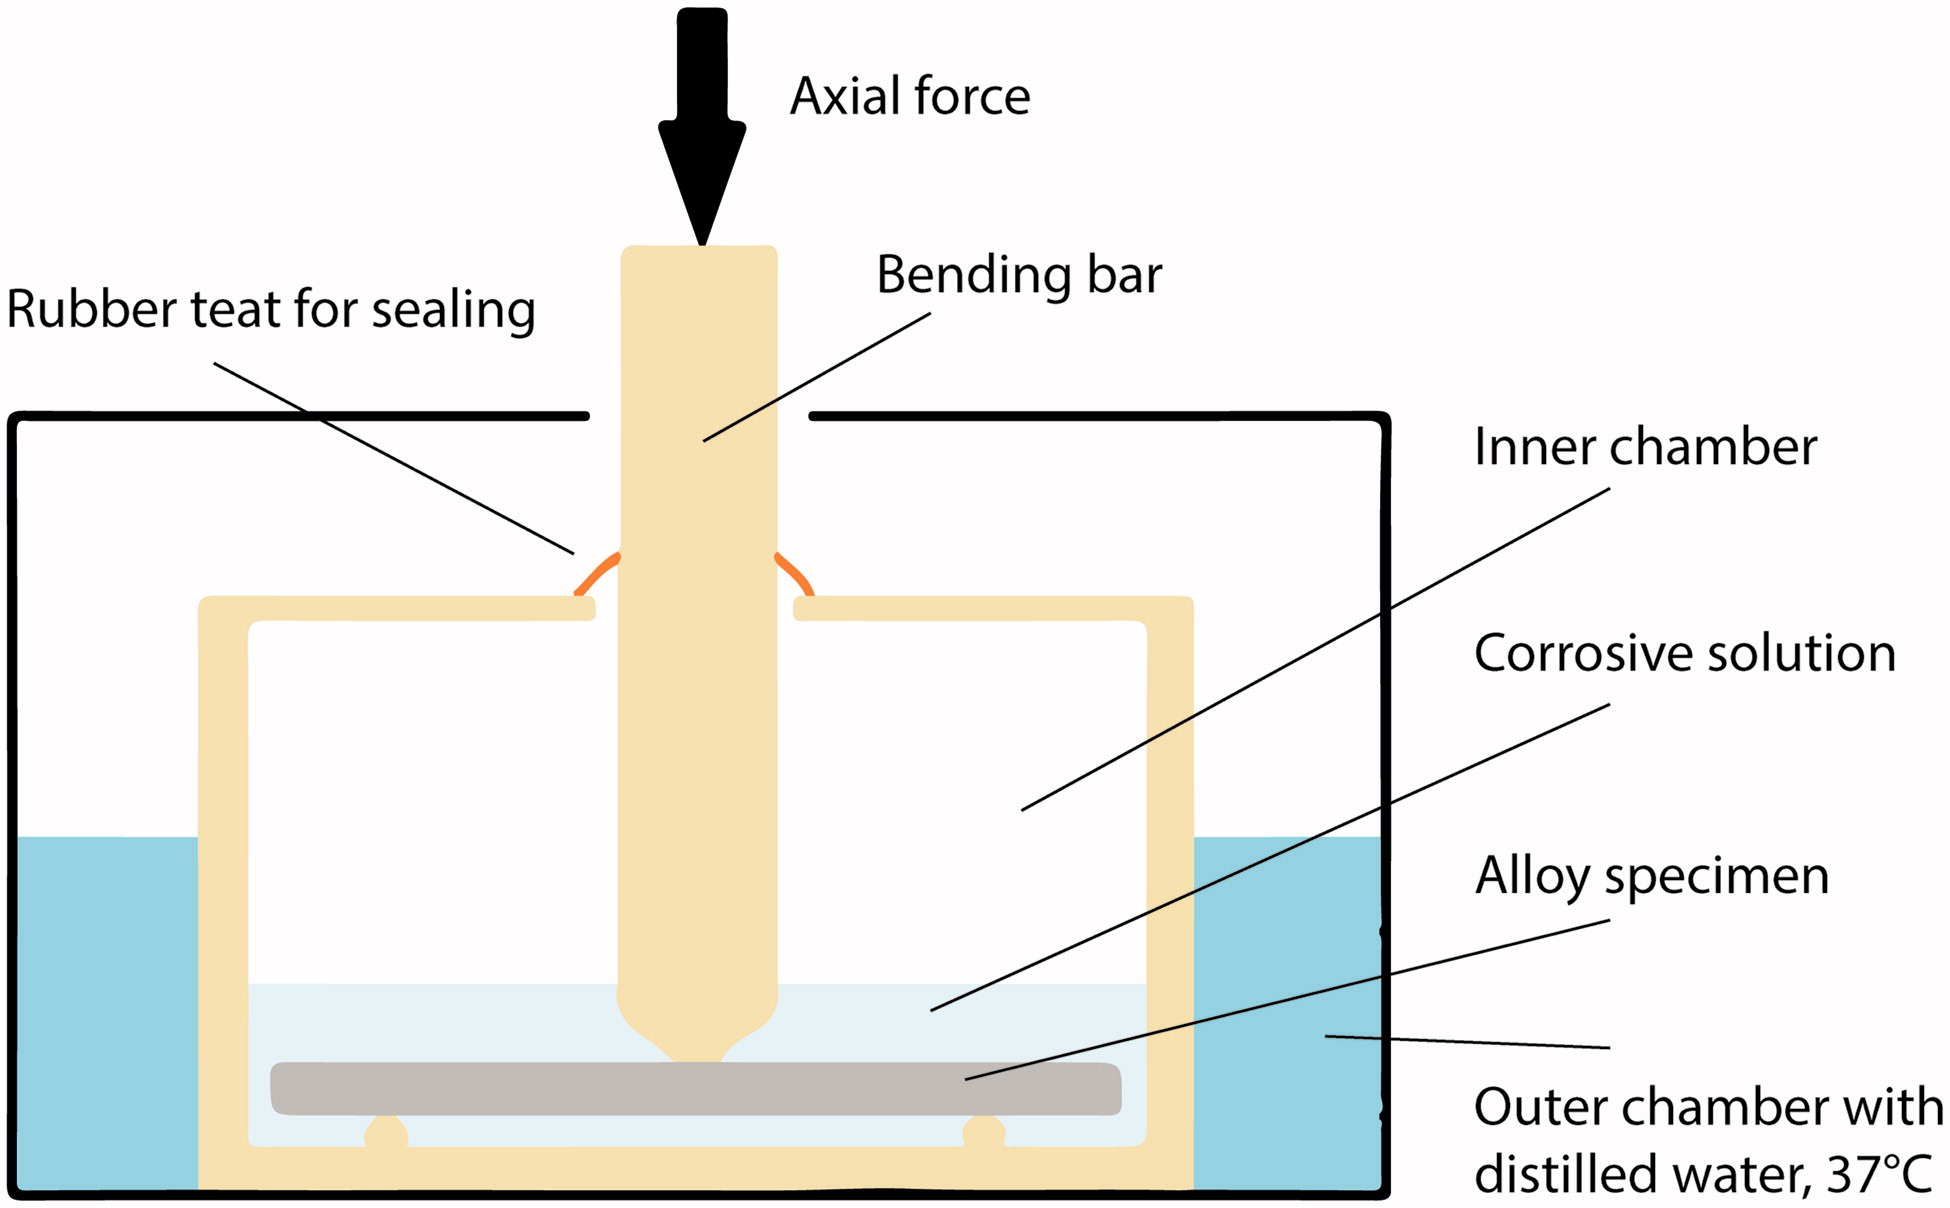 Commonly used alloys tested